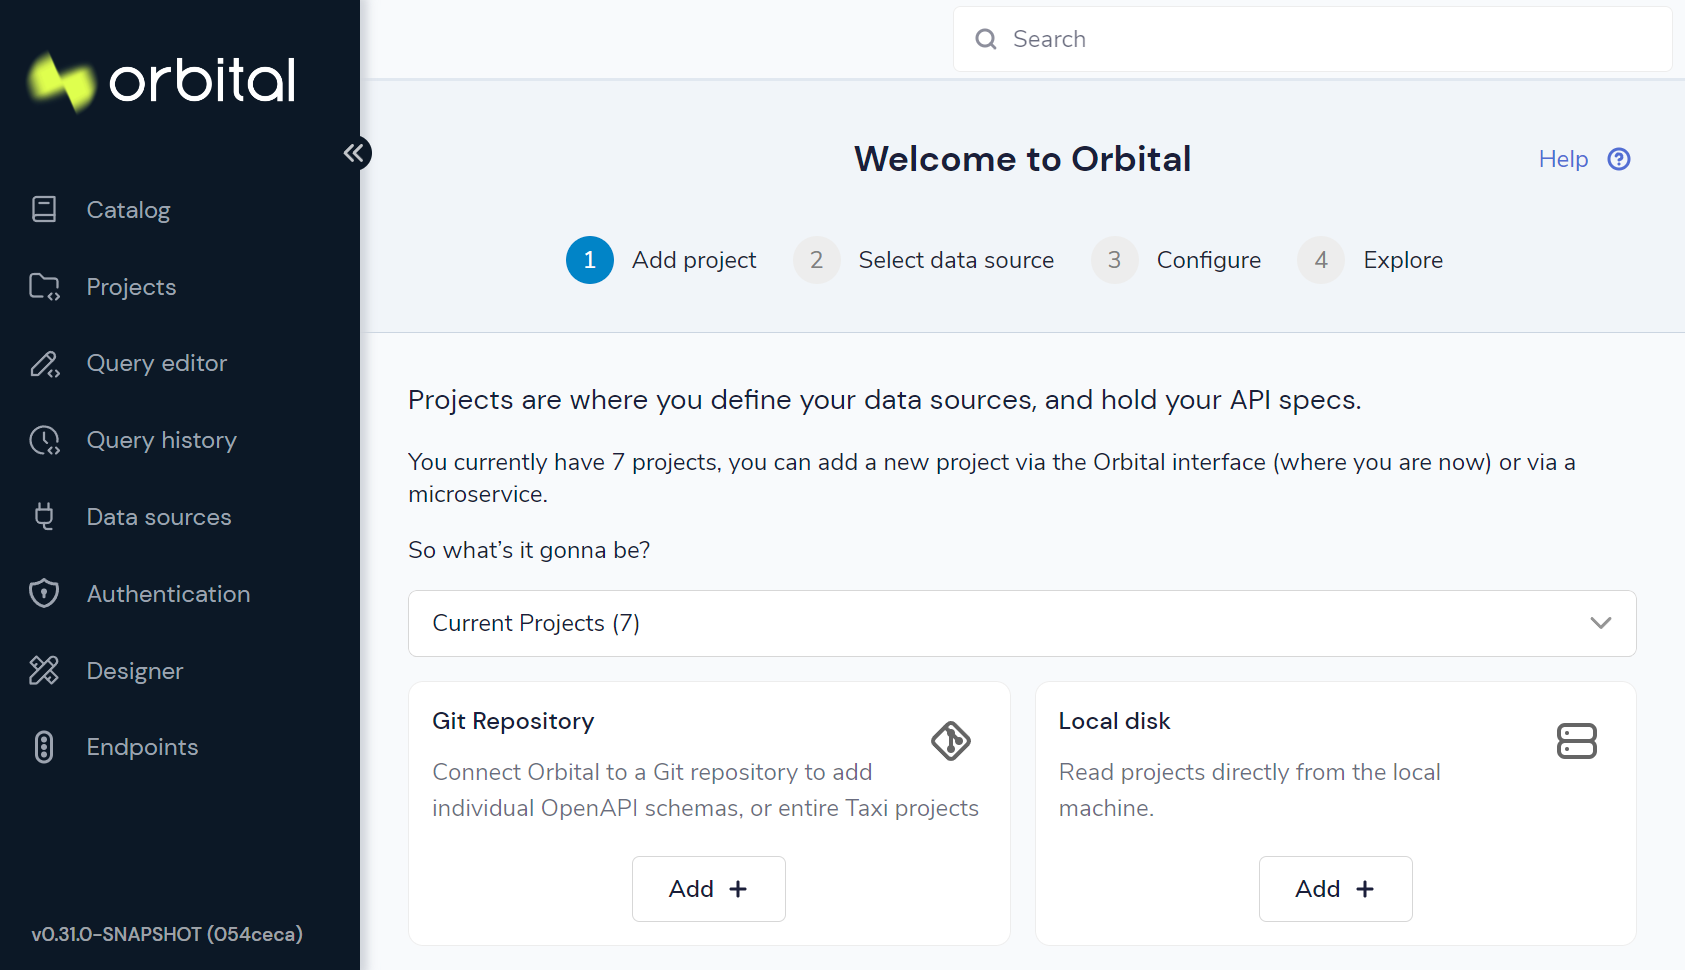 The new onboarding flow